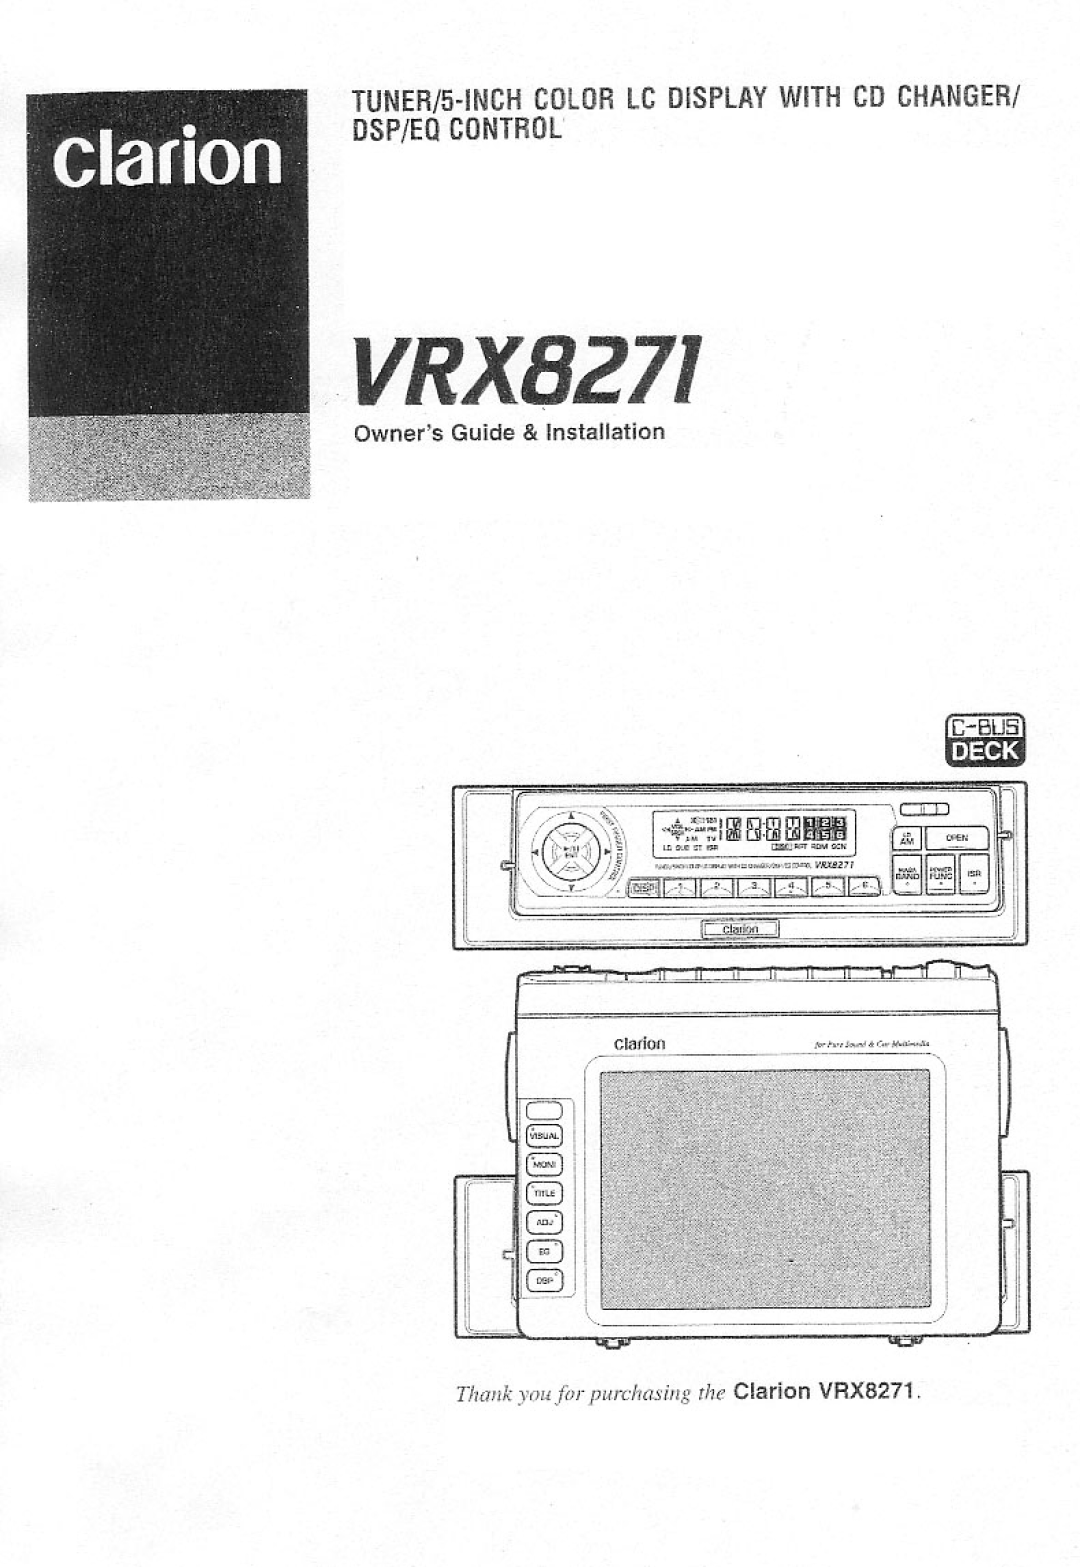 Clarion VRX8271 manual 